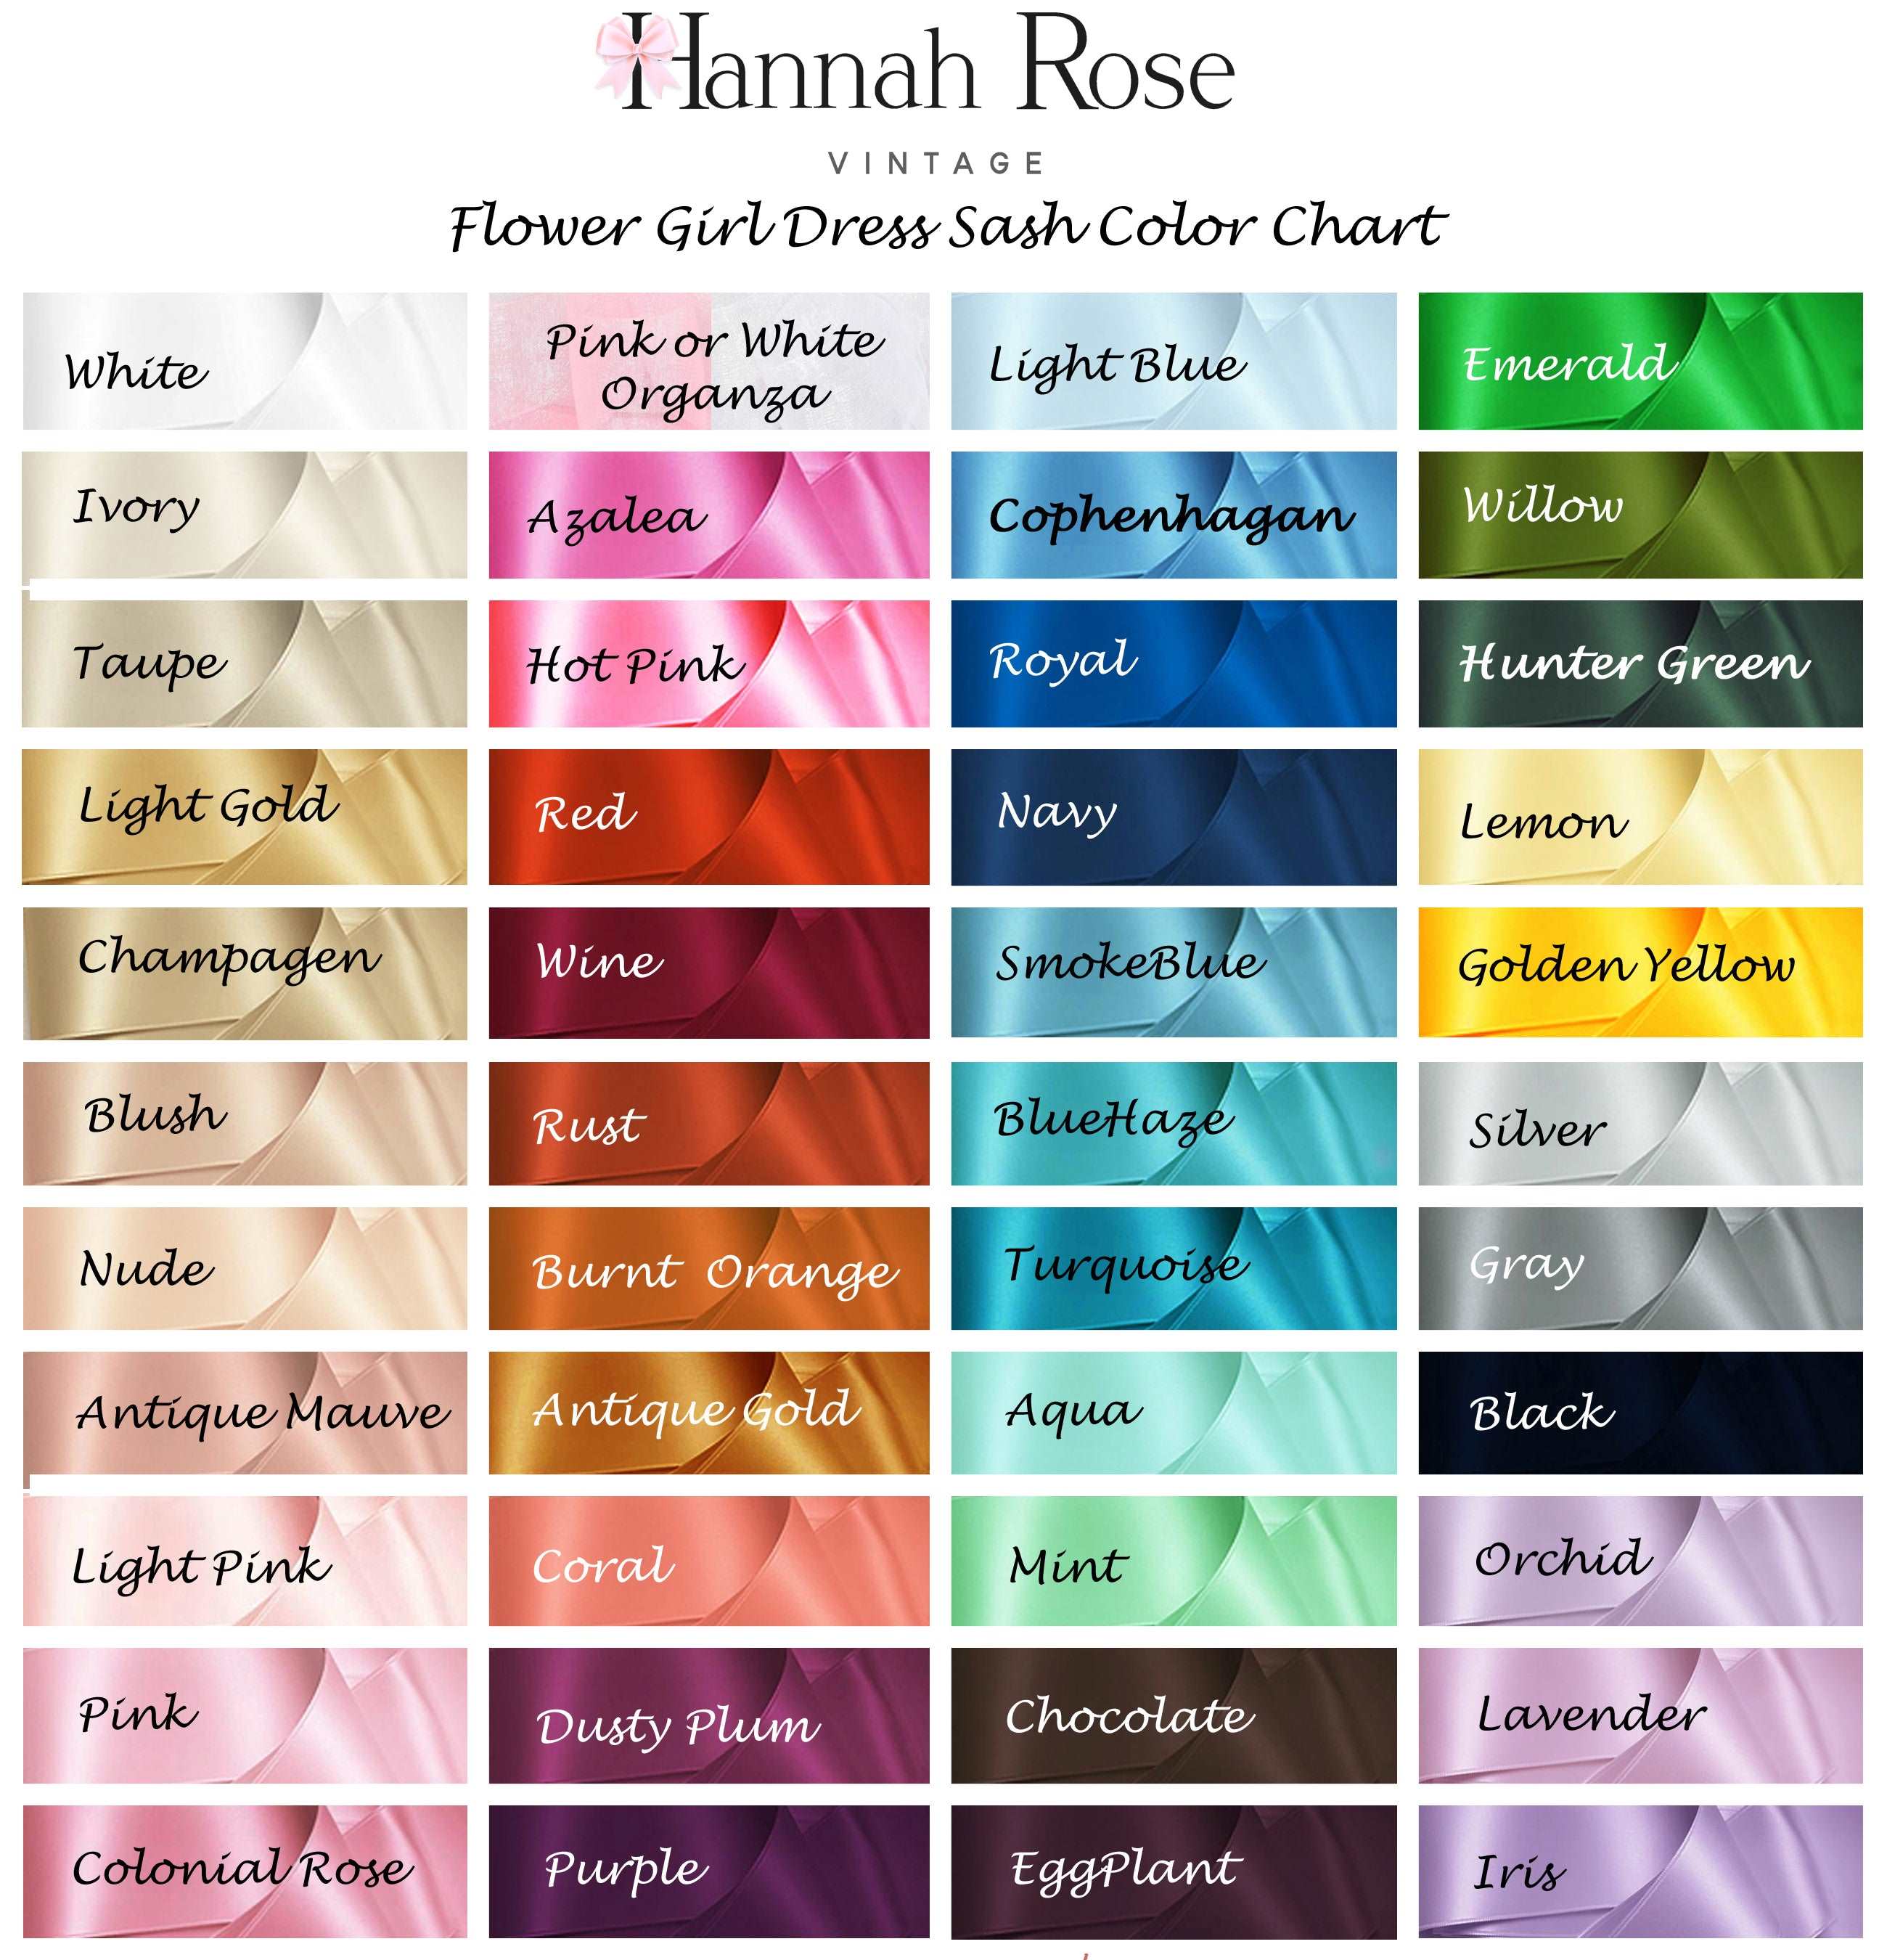 Flower Girl Dress Fabric Swatches